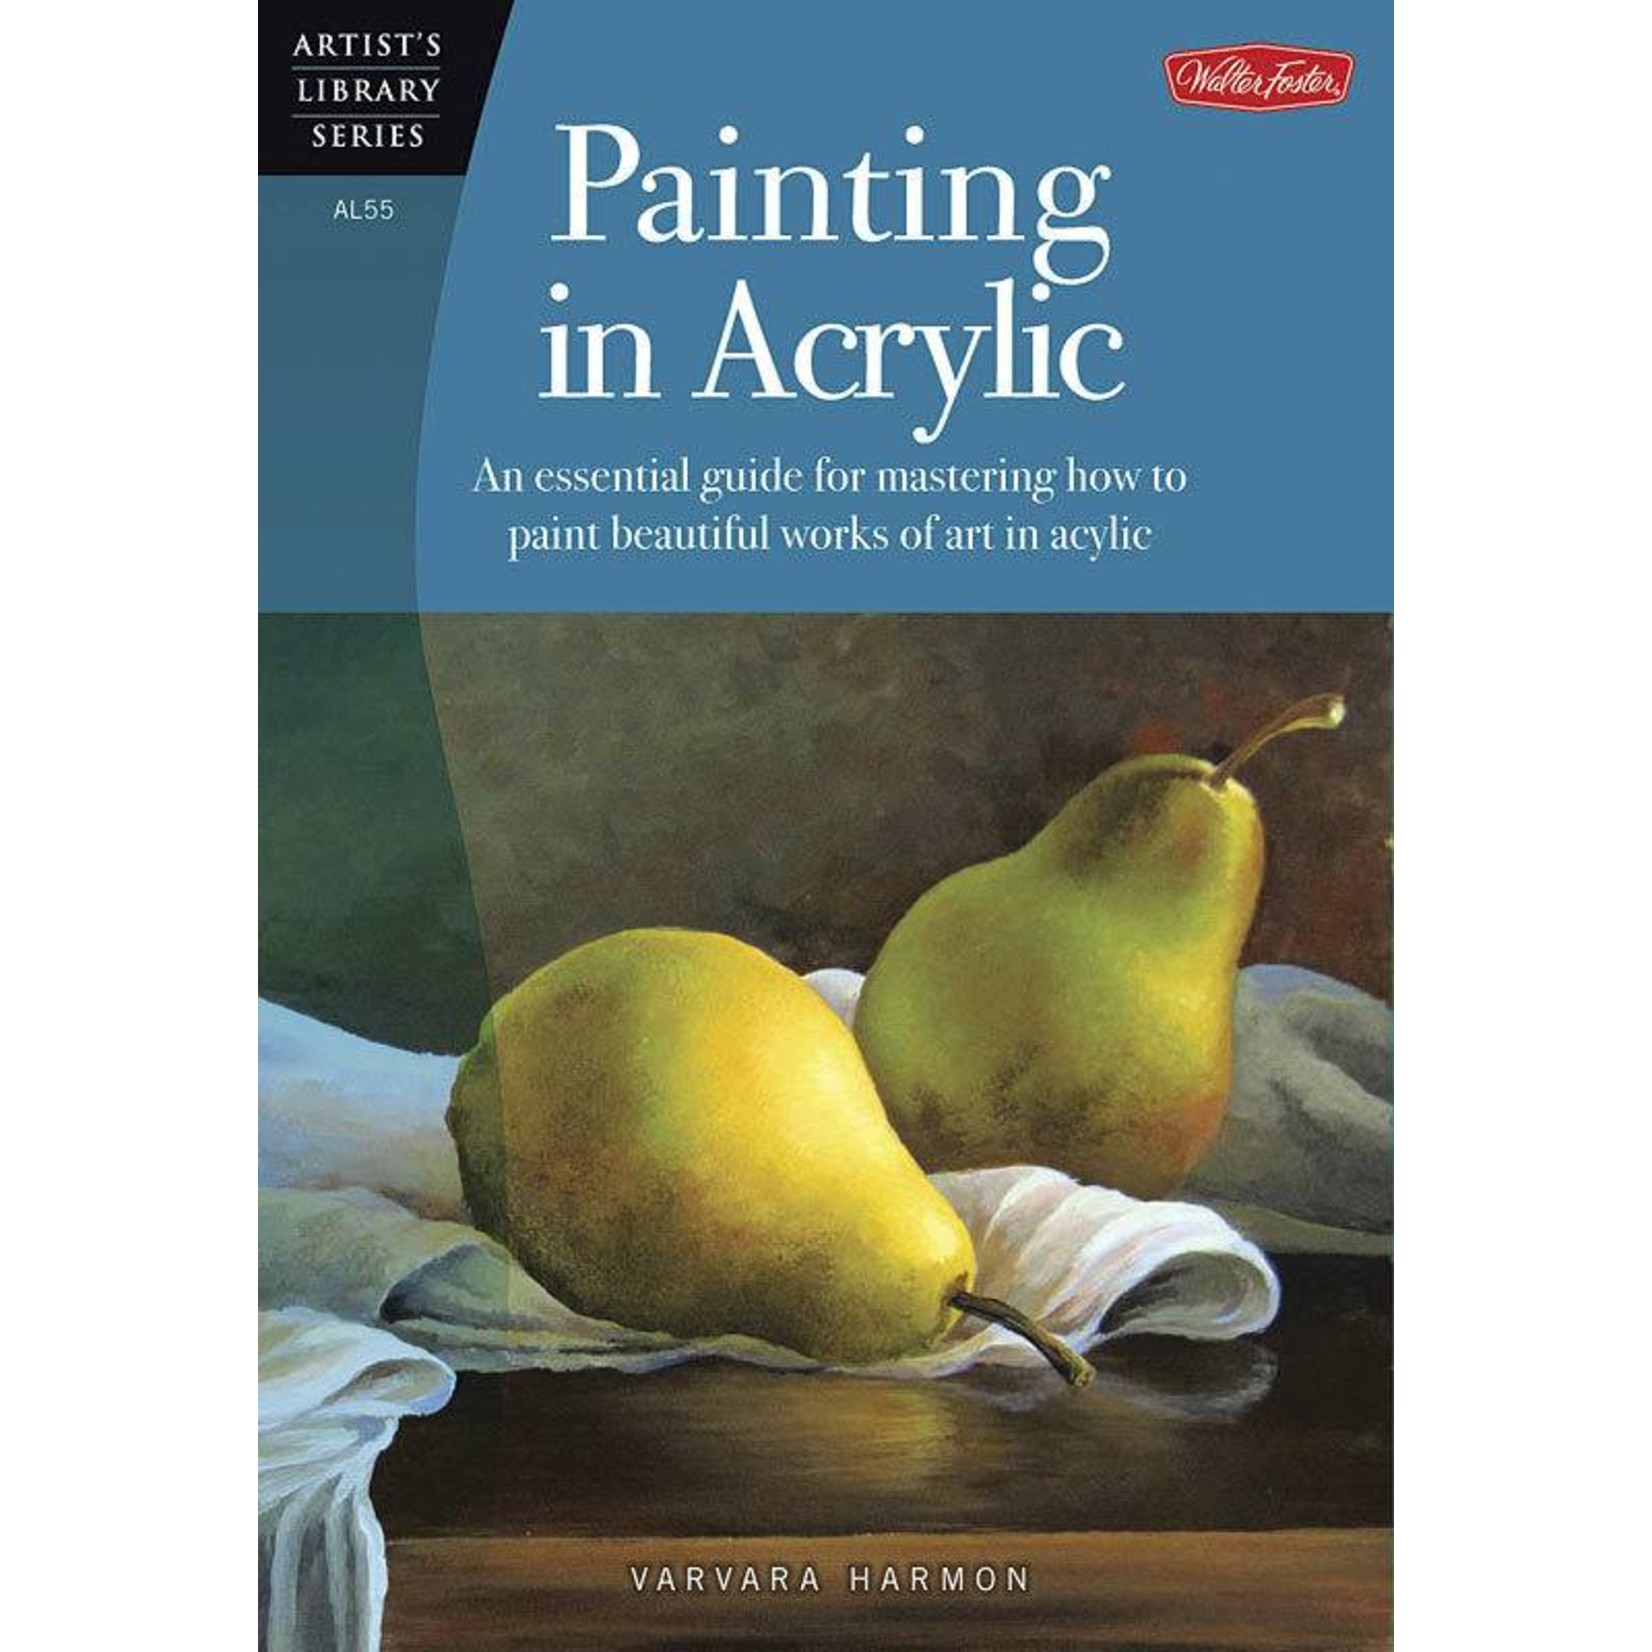 WALTER FOSTER WALTER FOSTER PAINTING IN ACRYLIC ARTIST'S LIBRARY SERIES